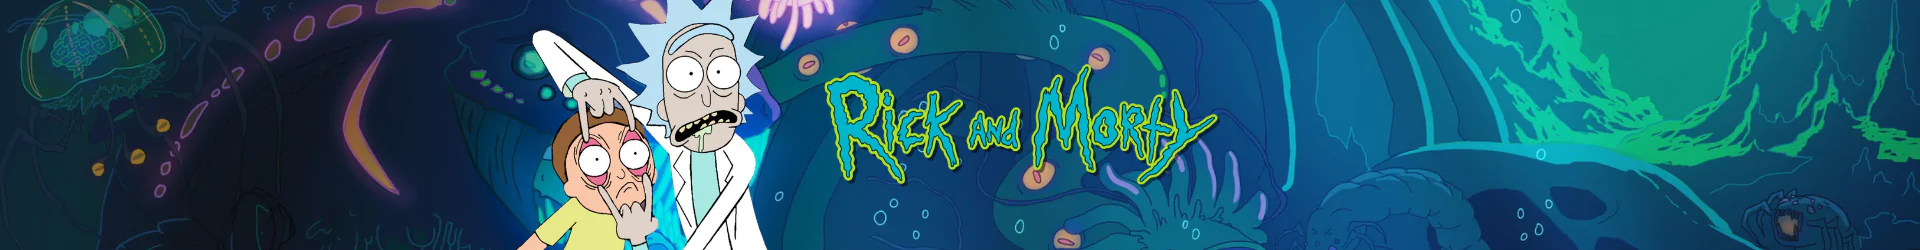 Rick and Morty Produkte banner